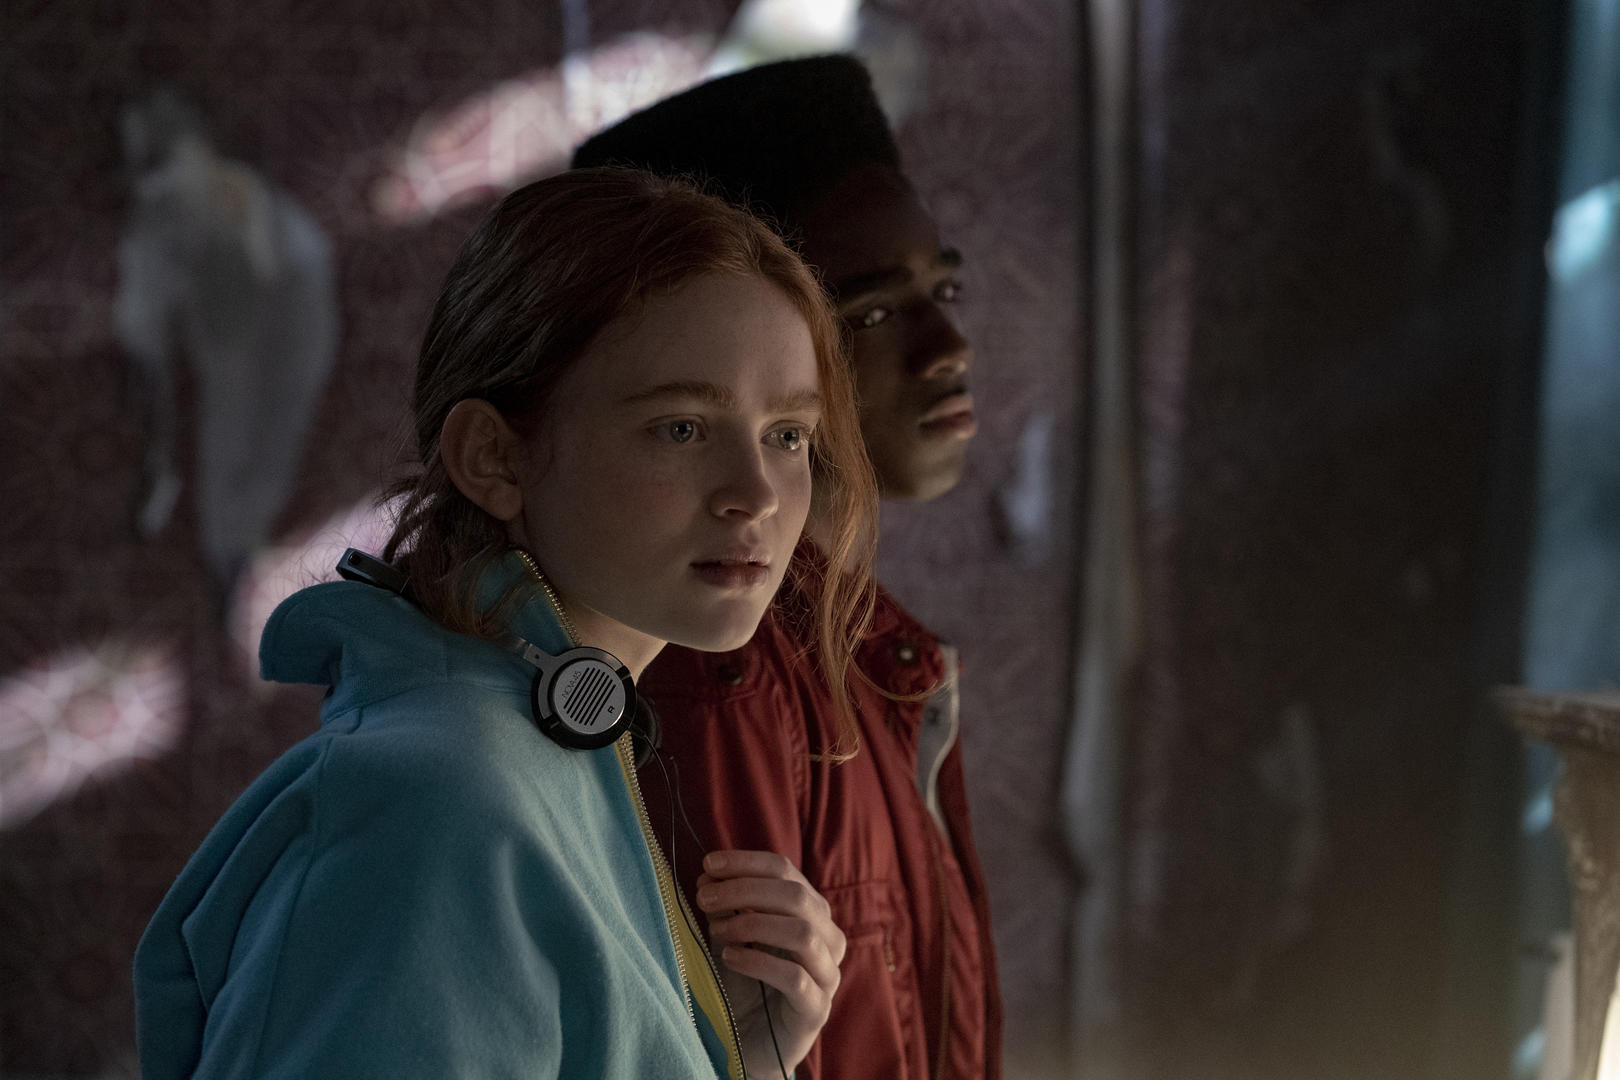 Max Mayfield (Sadie Sink) listens to Kate Bush's 'Running Up That Hill' while standing next to Lucas Sinclair (Caleb McLaughlin) in 'Stranger Things' Season 4